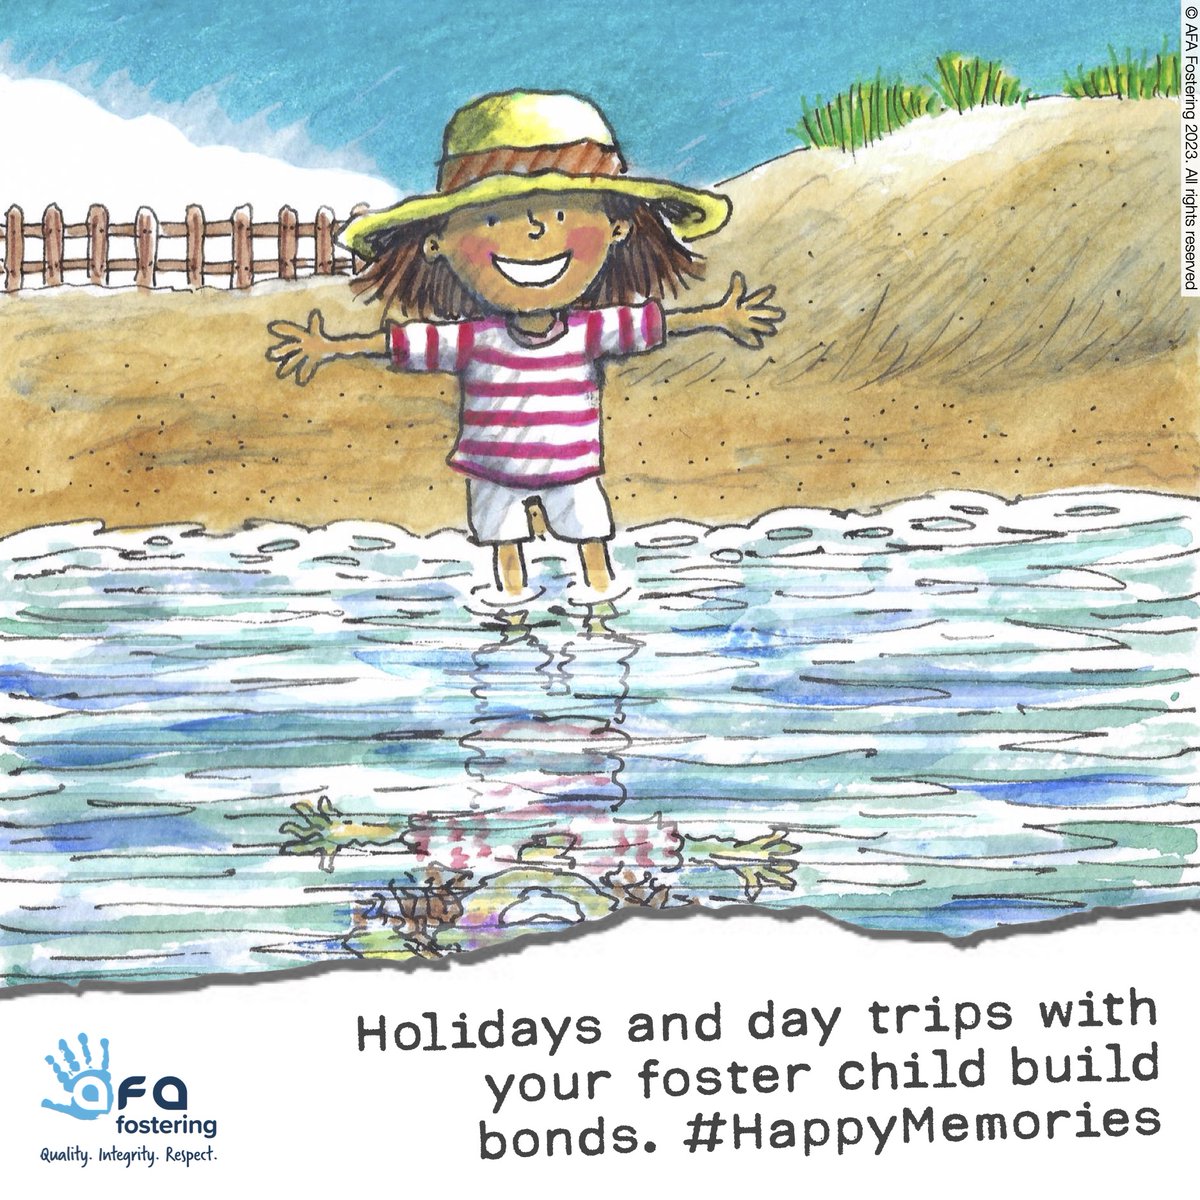 AFA Fostering champions shared memories. Day trips and holidays with foster kids build bonds and joy. Eager to create lasting moments? Call 0333 358 3217. #BondingThroughAdventure #FosterJoy